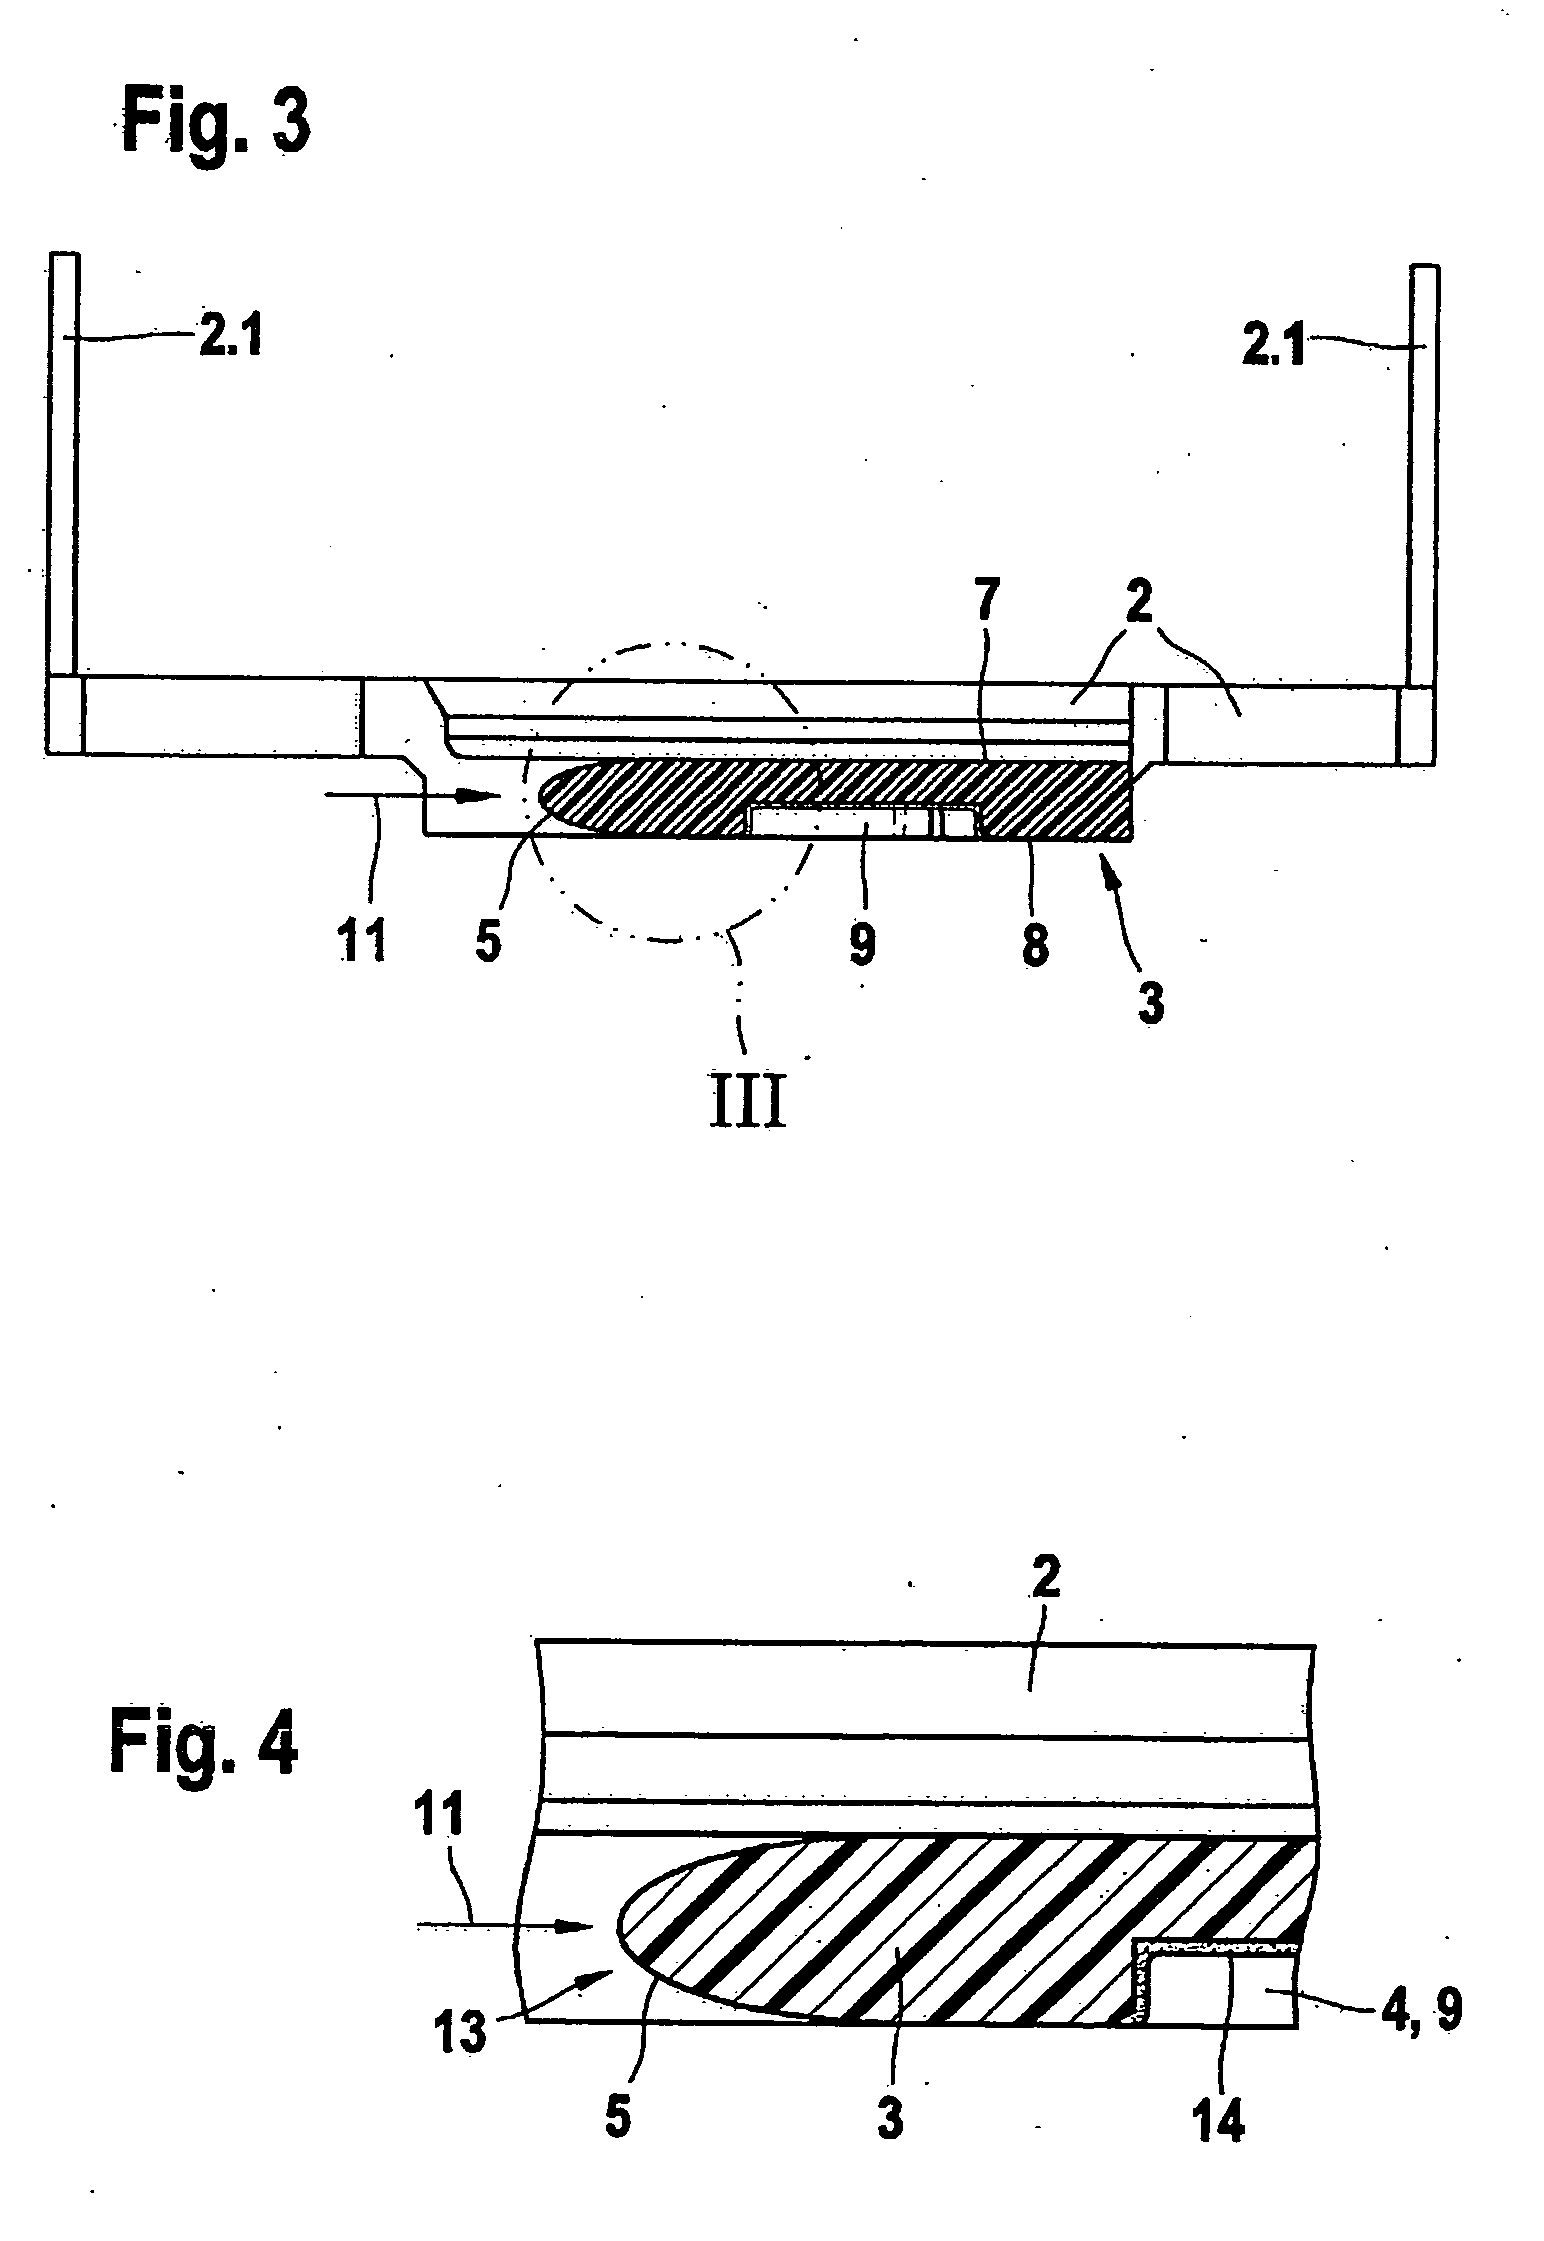 Printed-circuit board having a plastic part for accommodating a measuring device